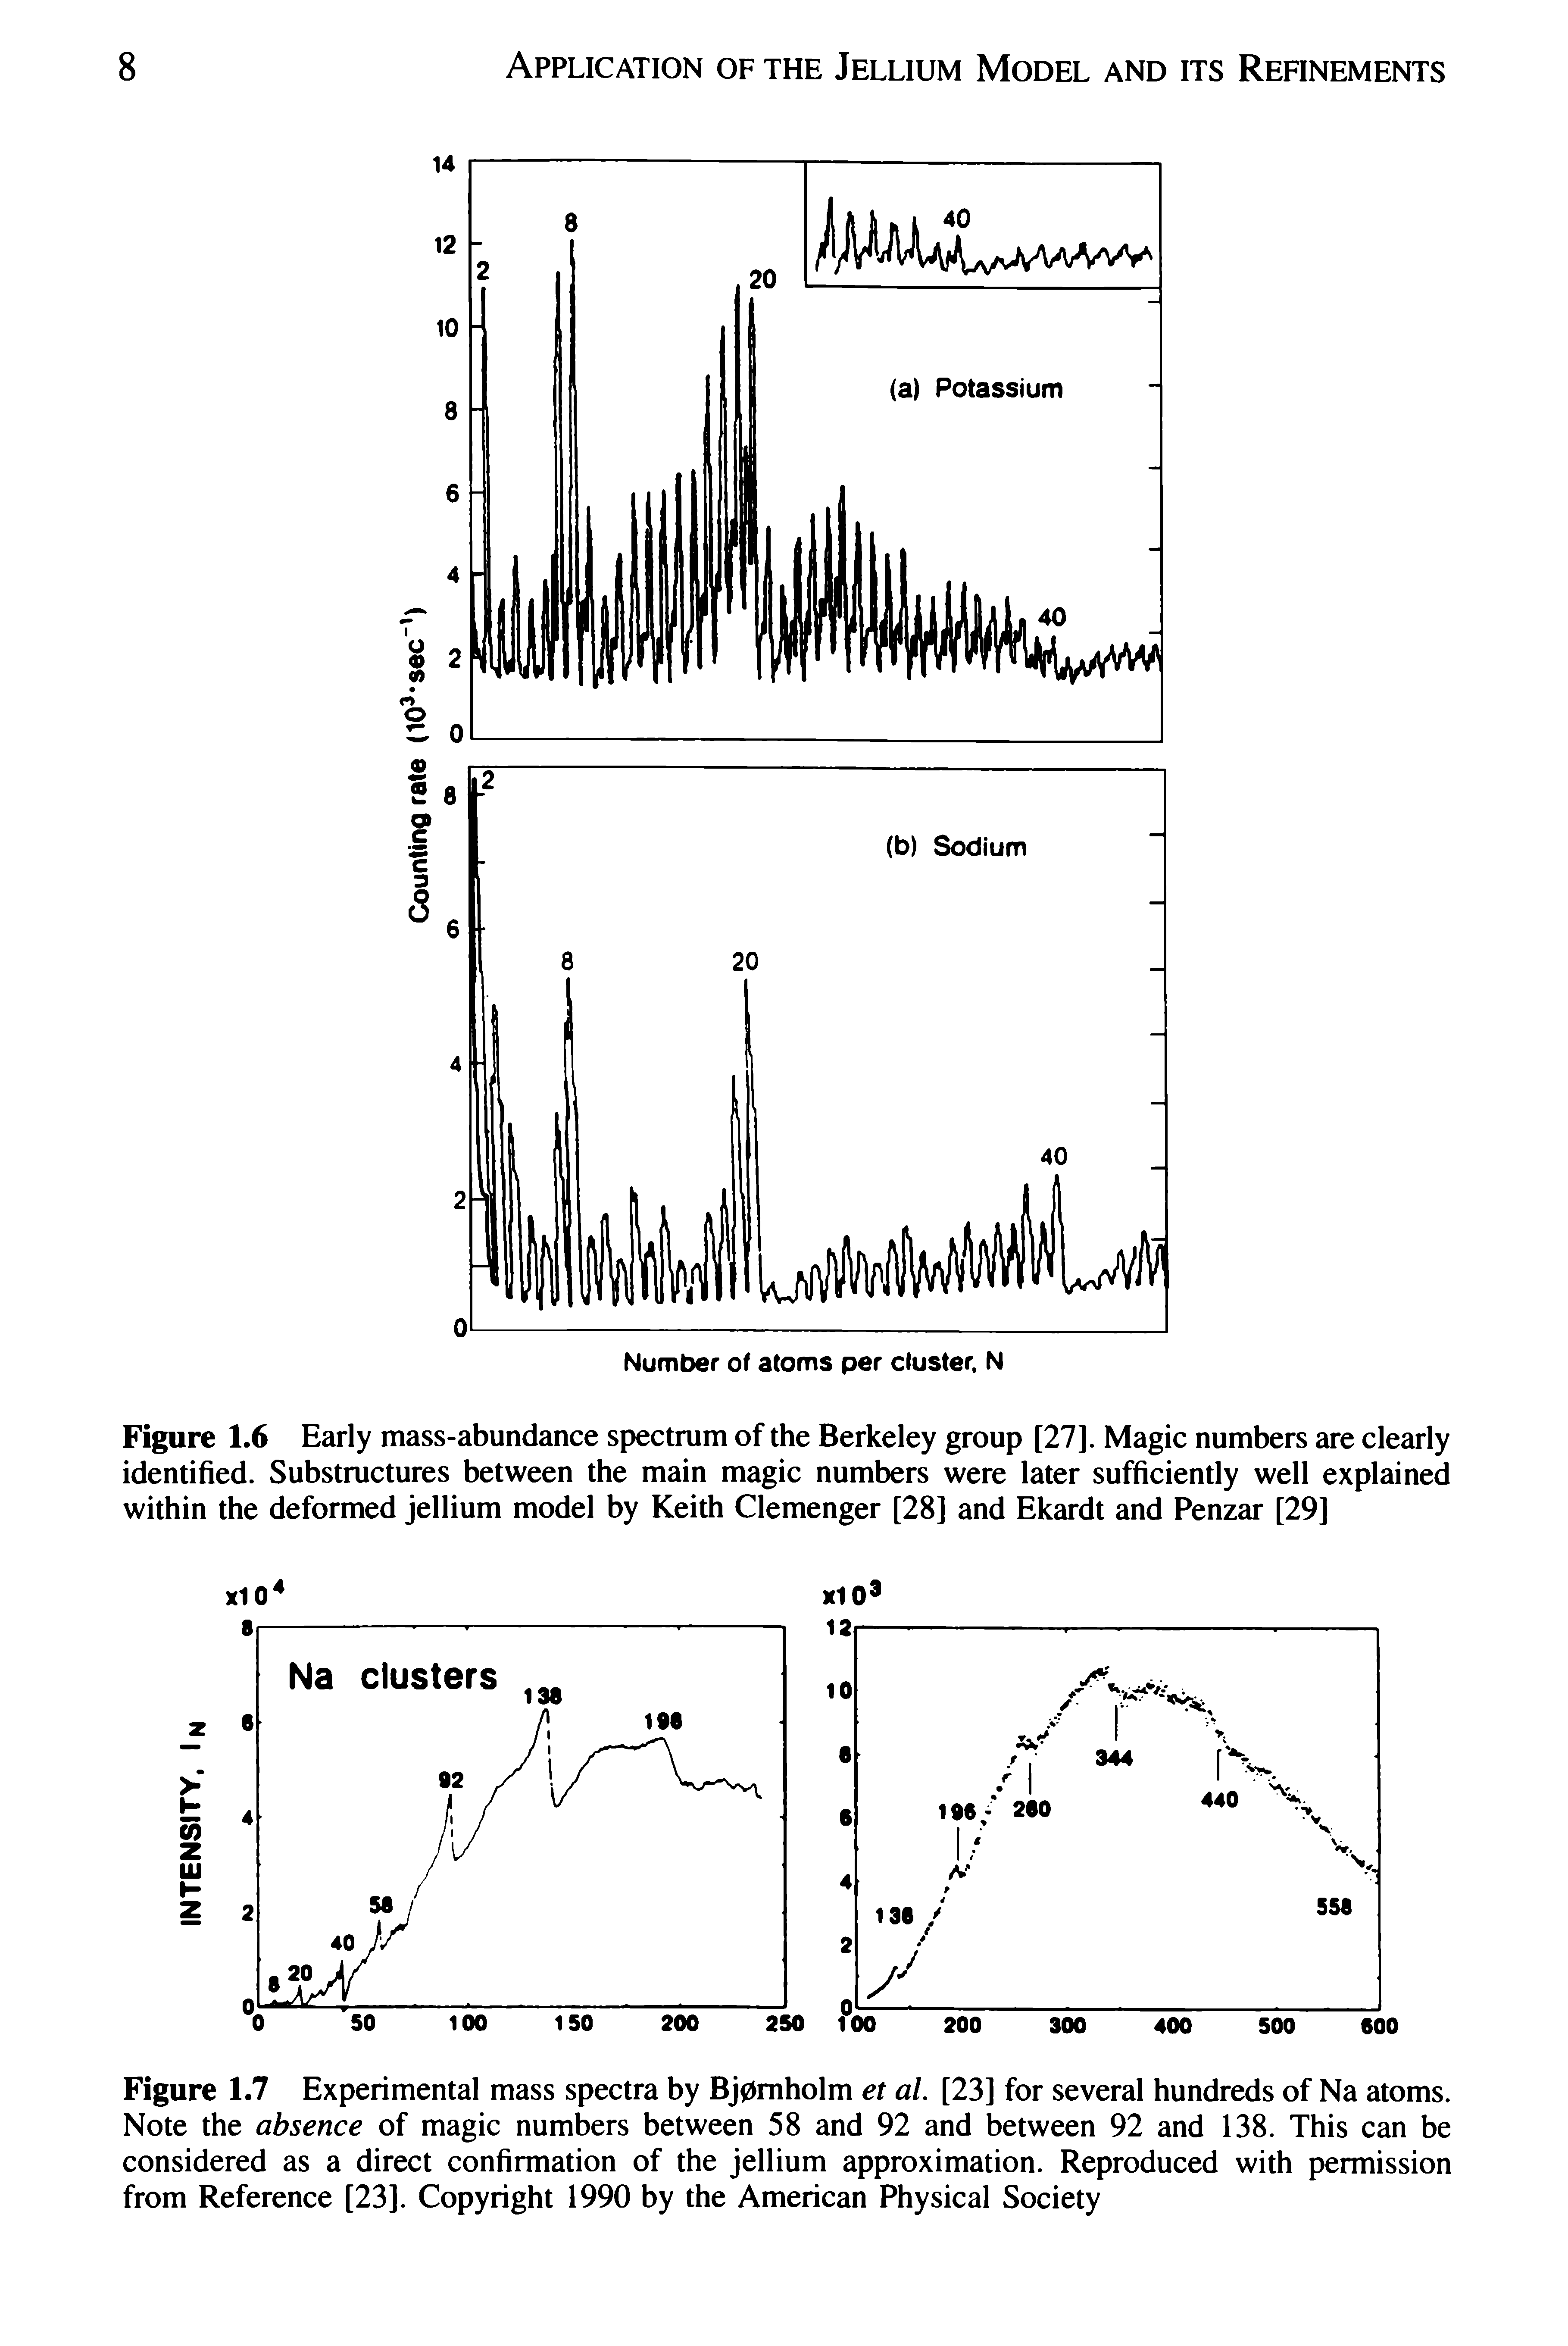 Figure 1.7 Experimental mass spectra by Bj0mholm et al. [23] for several hundreds of Na atoms. Note the absence of magic numbers between 58 and 92 and between 92 and 138. This can be considered as a direct confirmation of the Jellium approximation. Reproduced with permission from Reference [23]. Copyright 1990 by the American Physical Society...